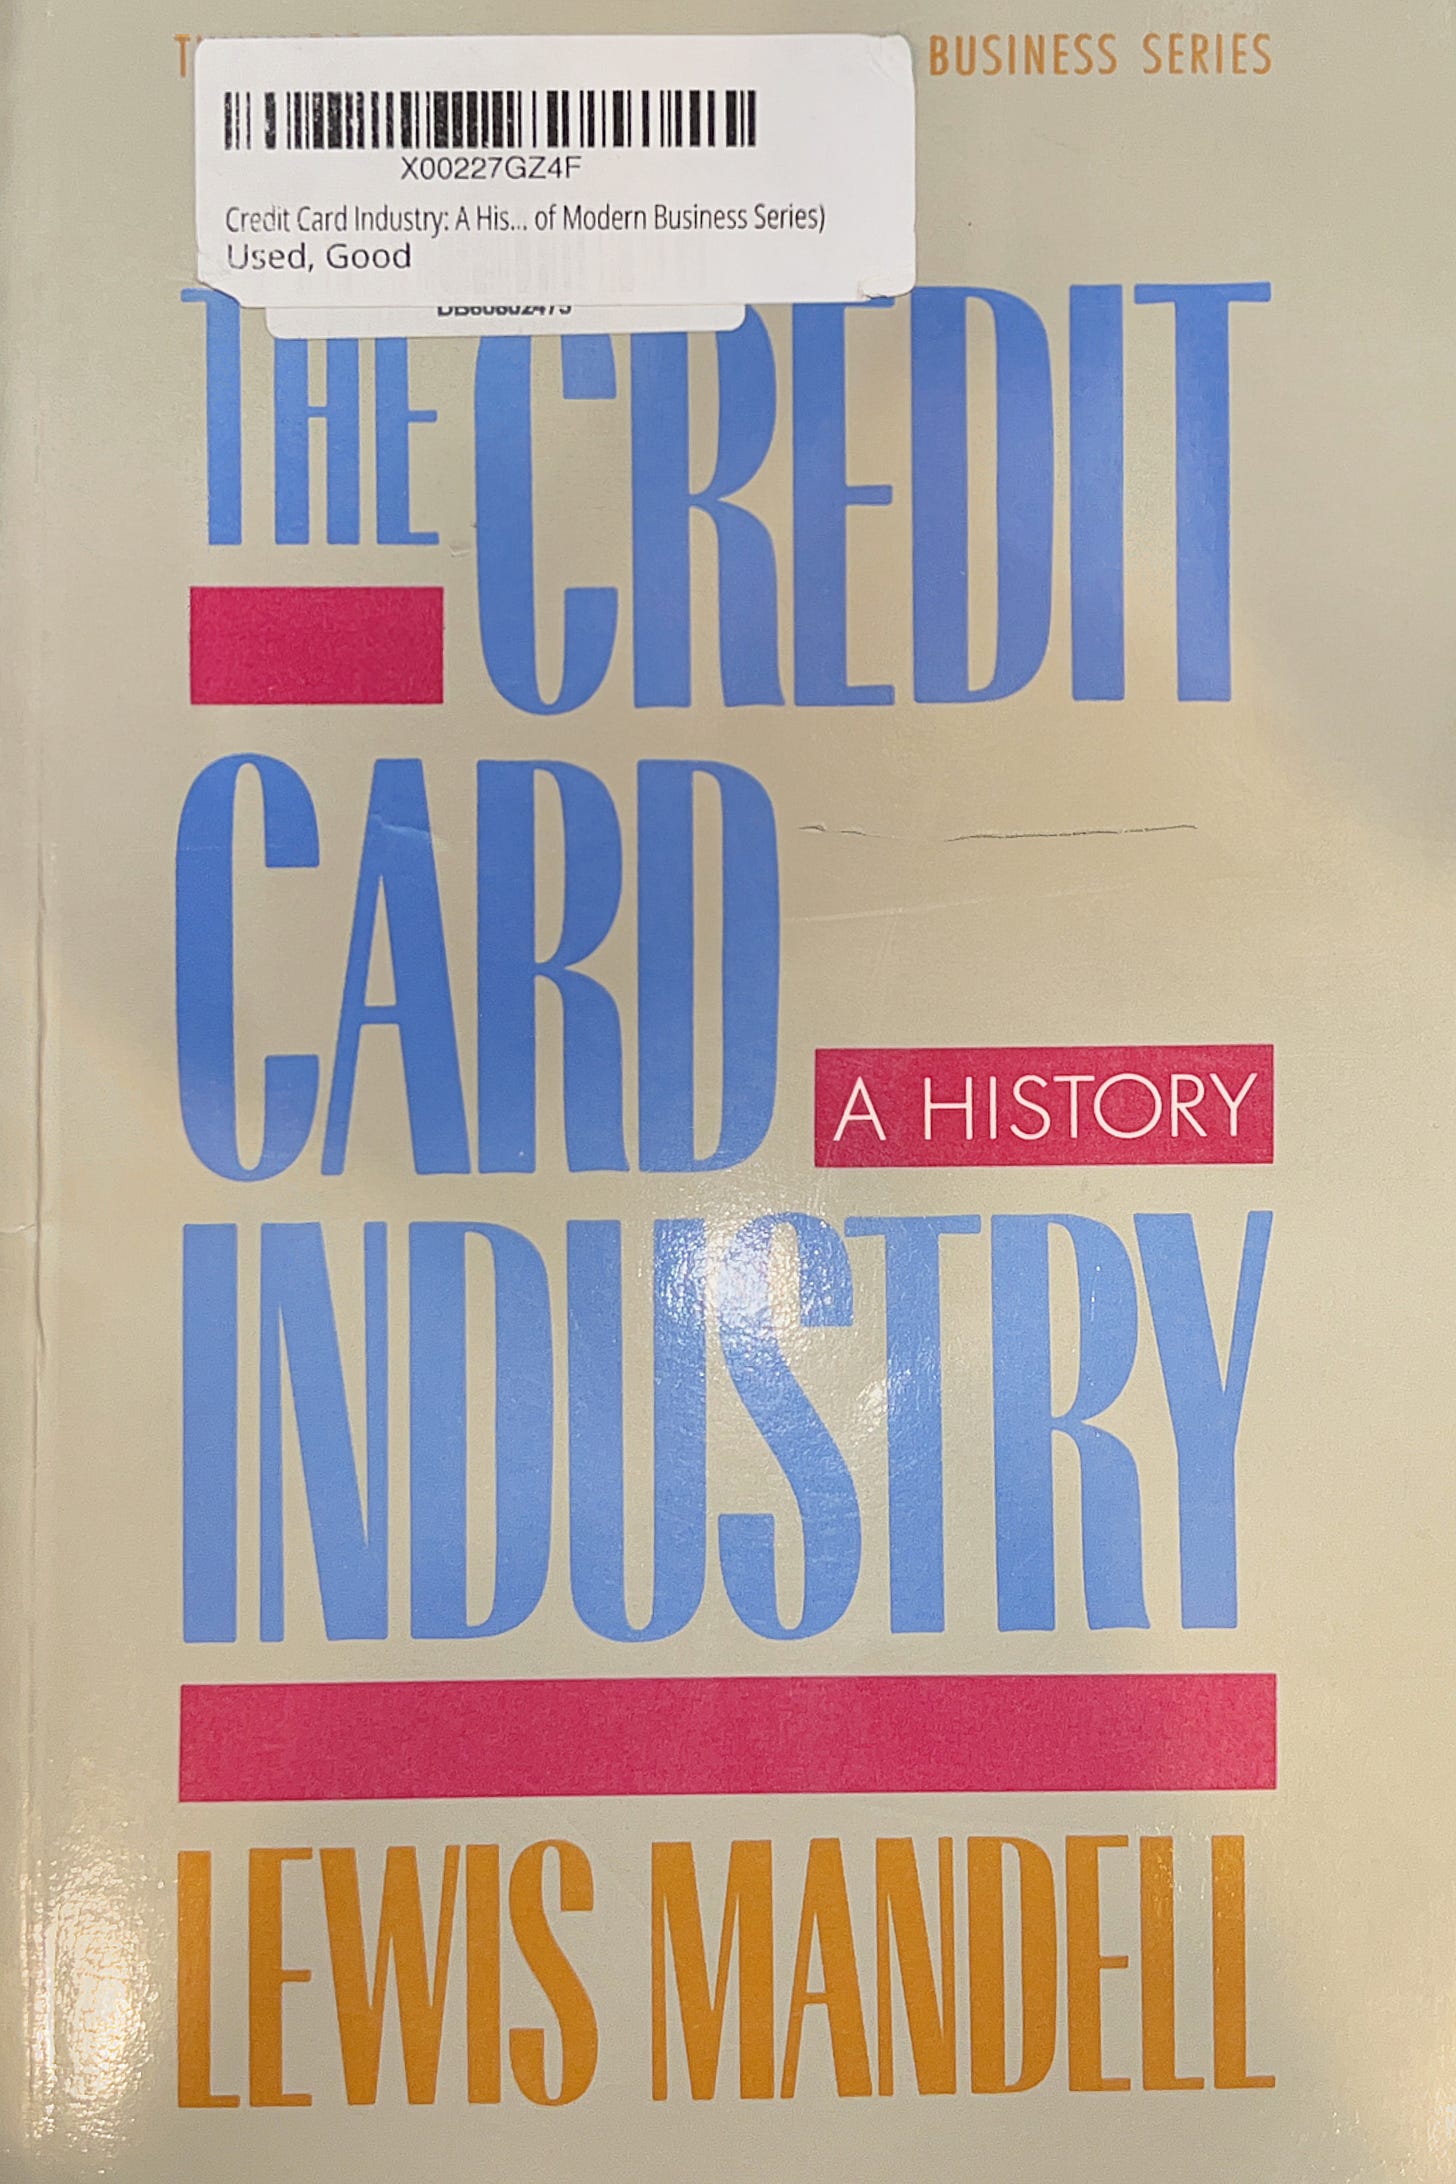 The Credit Card Industry: A History